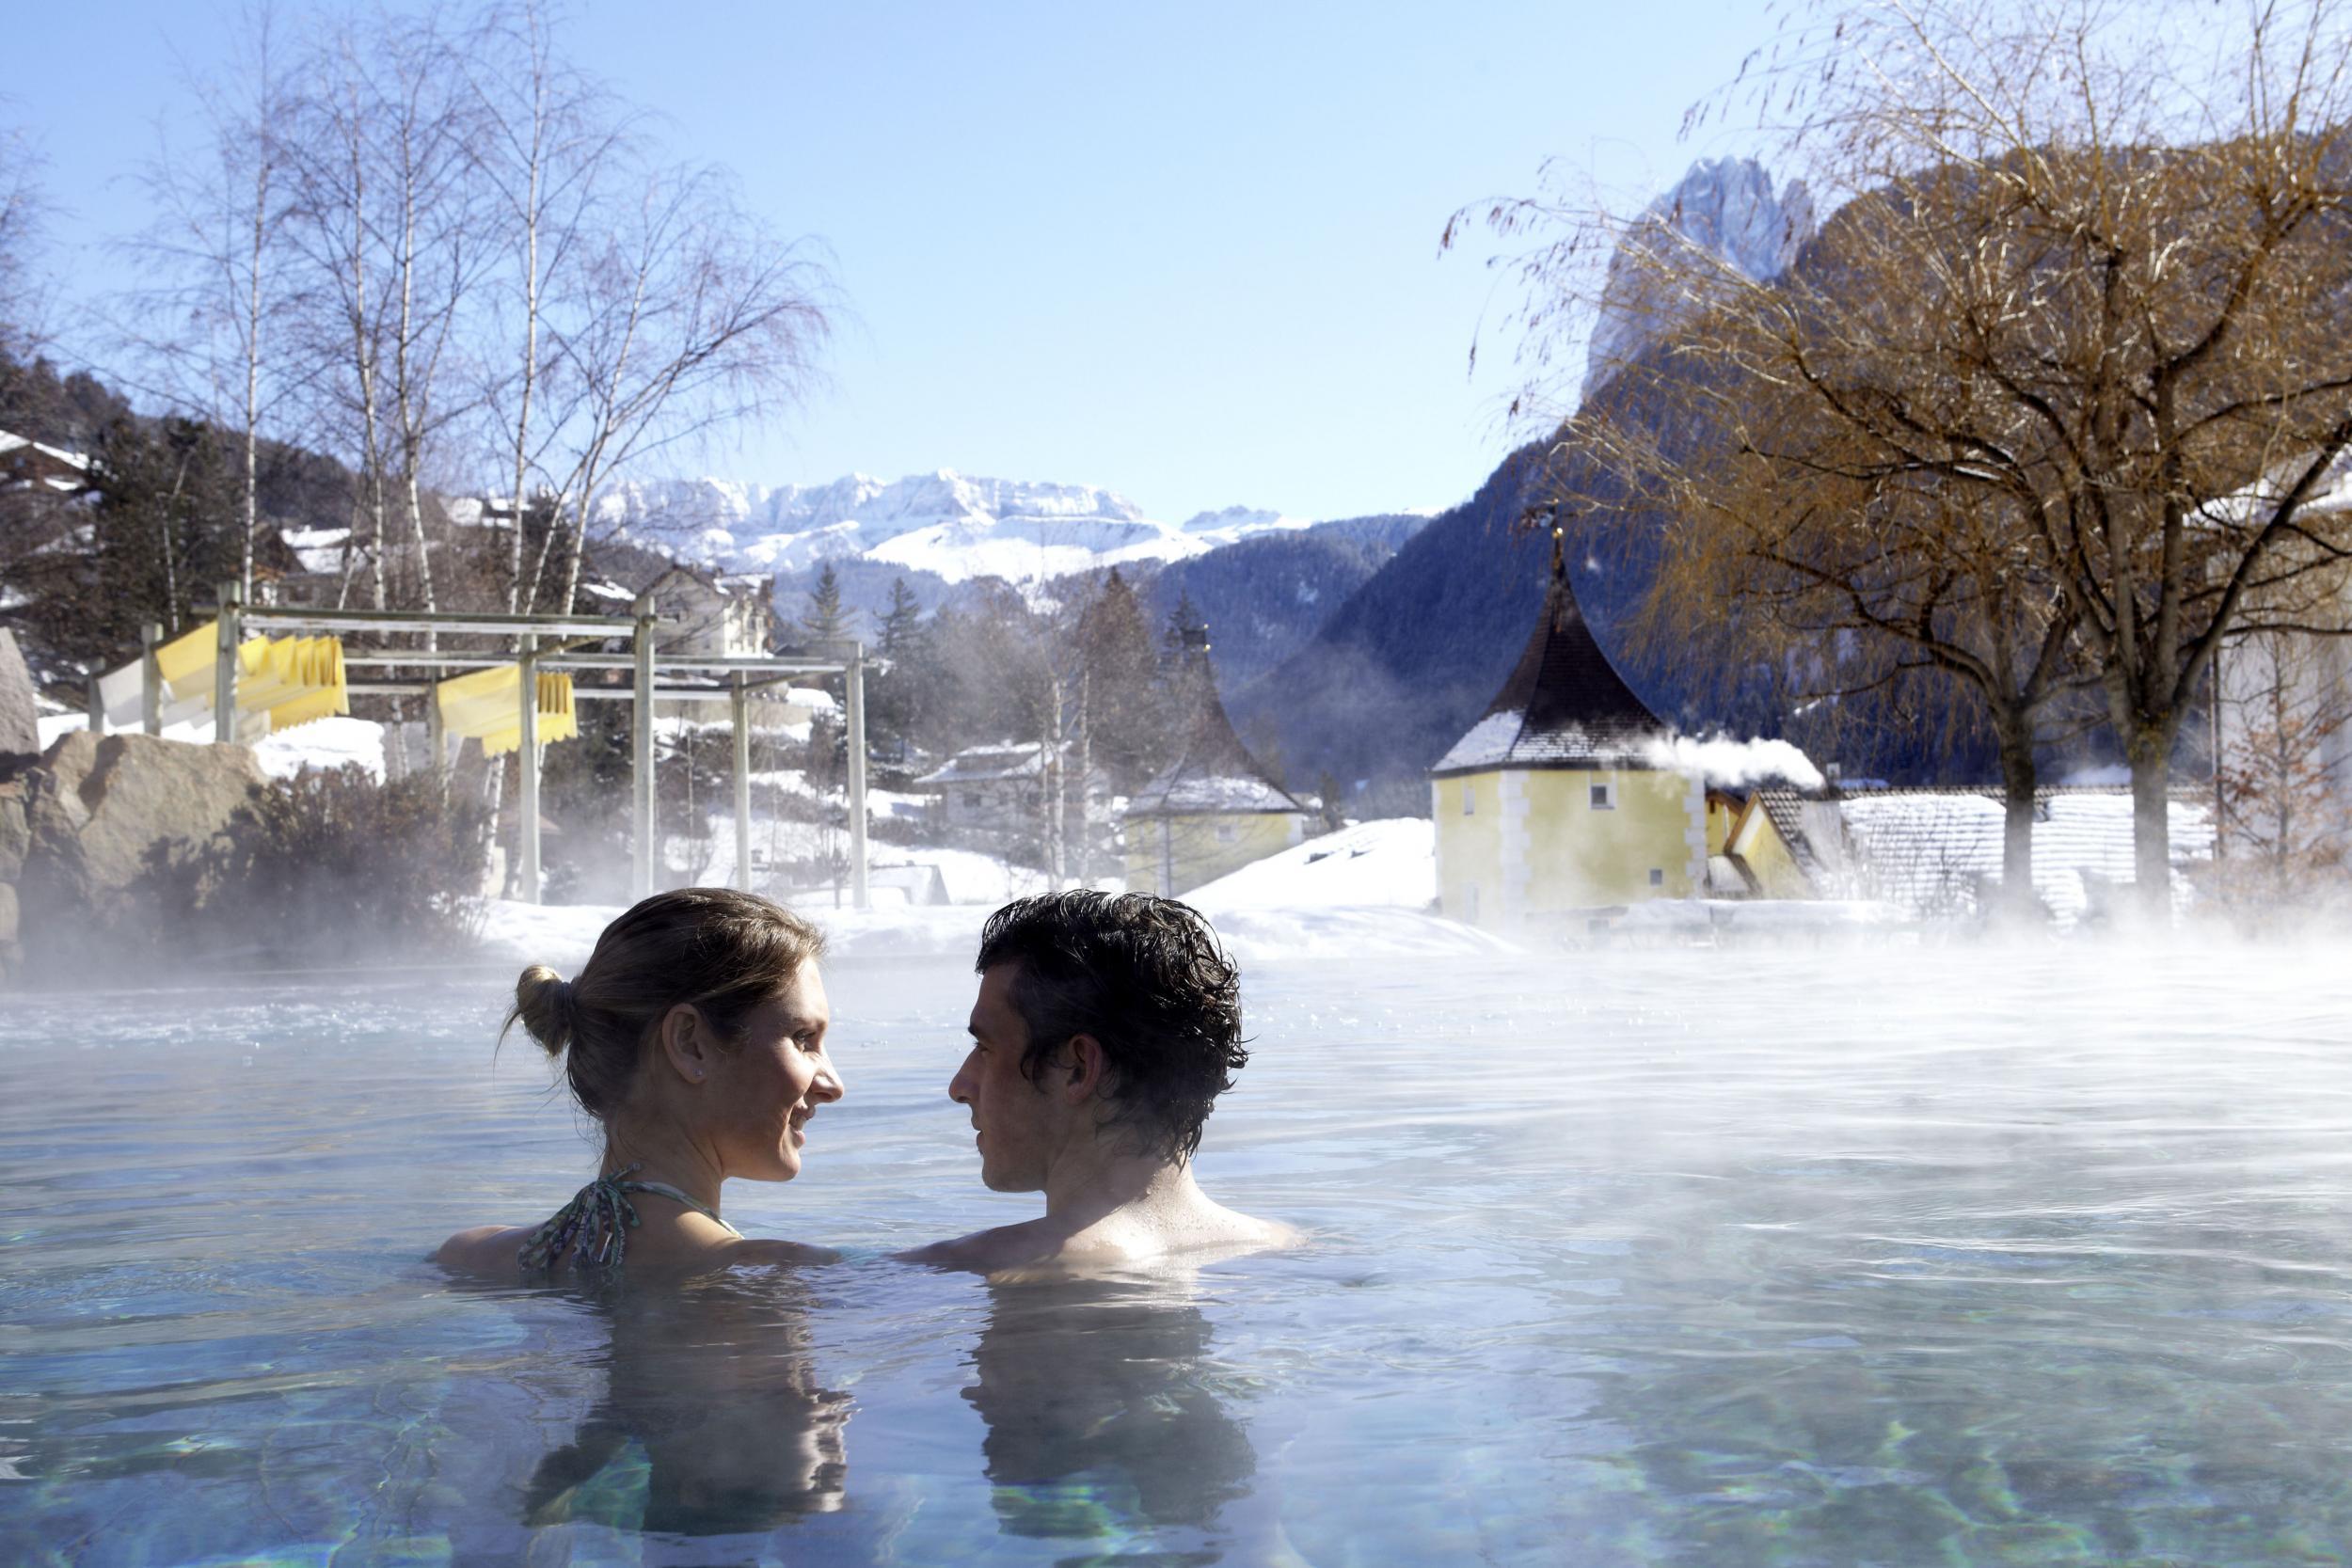 Adler Balance in the Dolomites offers thermal pools and sound frequency therapy